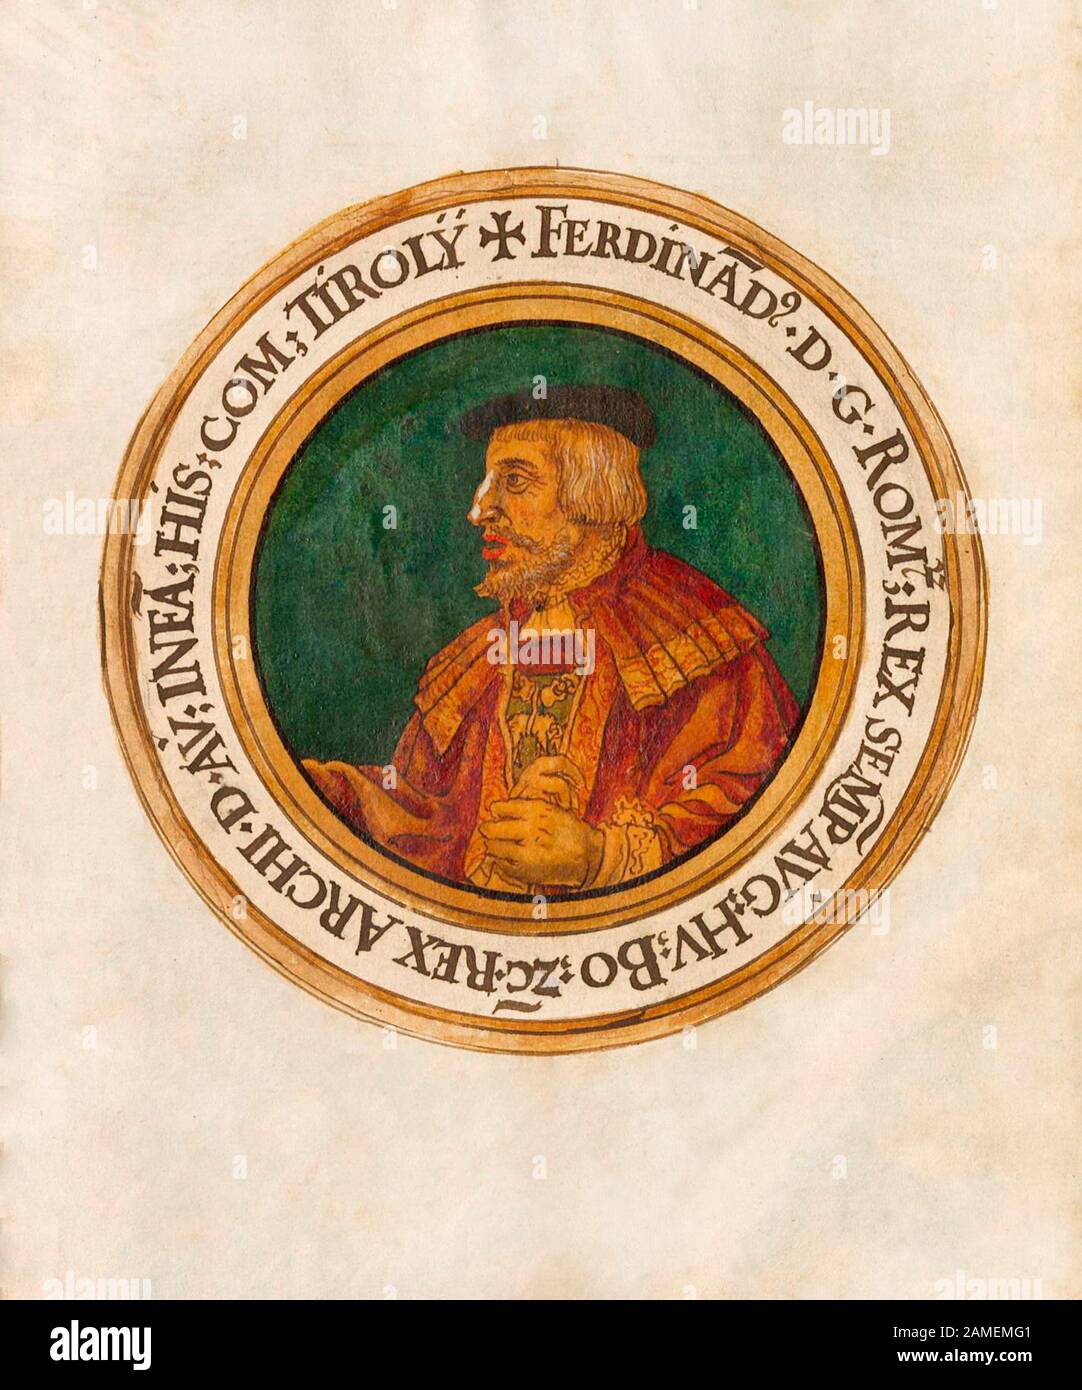 Ferdinand I (Fernando I) (1503 – 1564) was Holy Roman Emperor from 1556, king of Bohemia and Royal Hungary from 1526, and king of Croatia from 1527 un Stock Photo